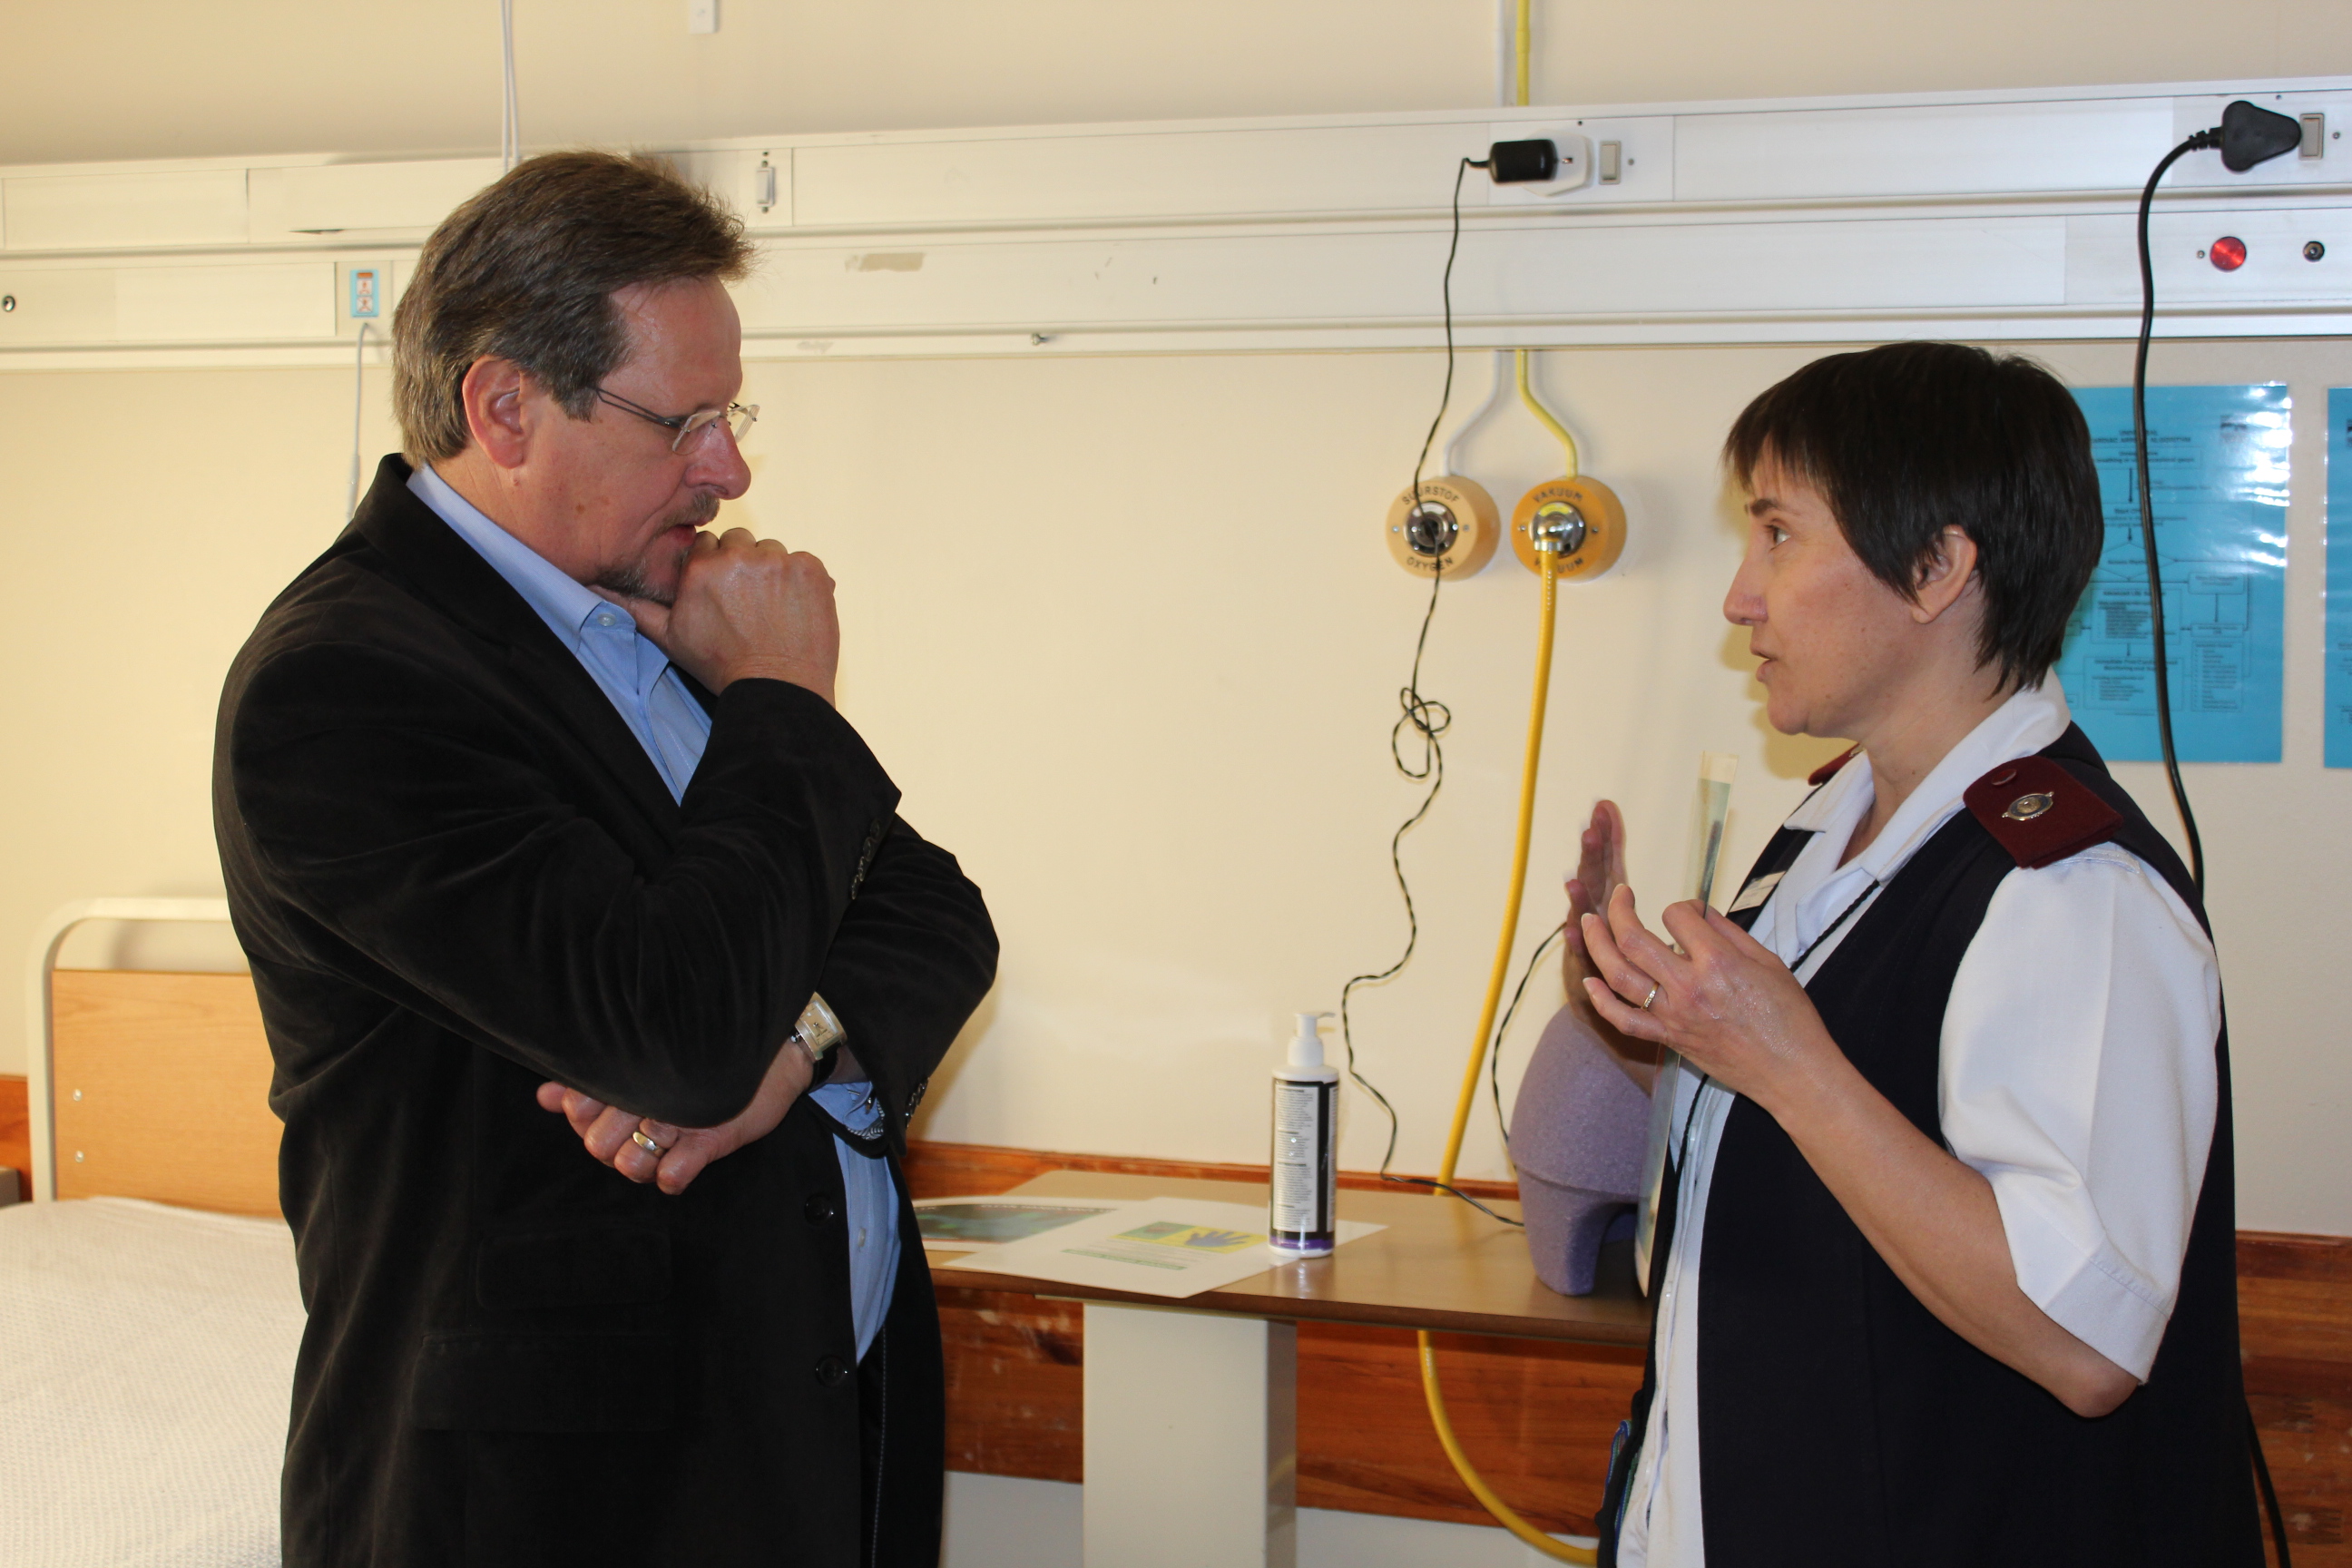 Desireè Maritz, Infection and Prevention Control Coordinator, explains the correct handwashing procedure to Western Cape Minister of Health, Theuns Botha.